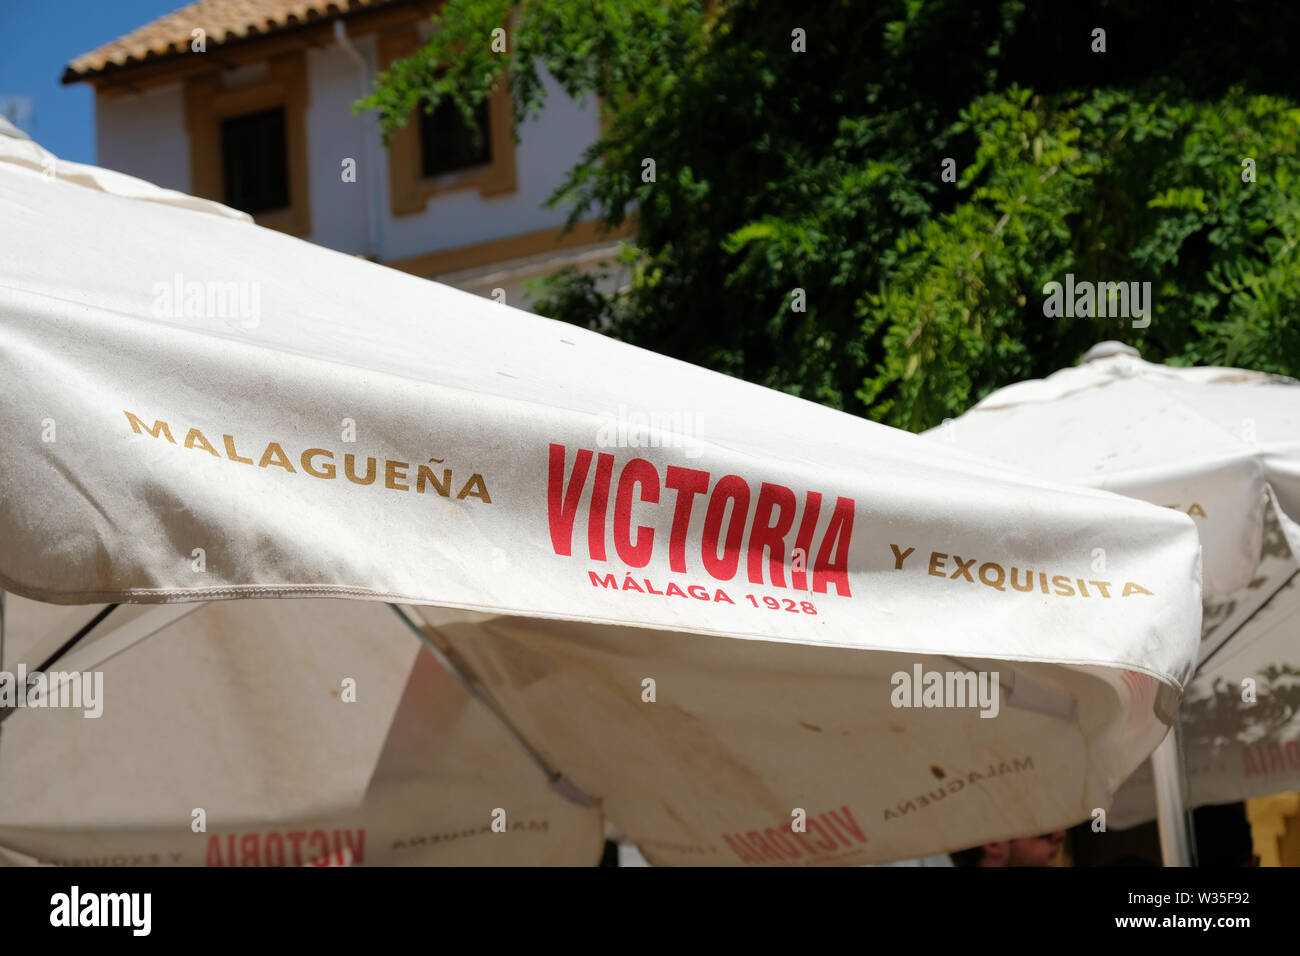 Advertisement for Victoria Beer, established in Malaga in 1928, on the edge of an umbrella cover in a patio restaurant in Cordoba, Spain. Stock Photo